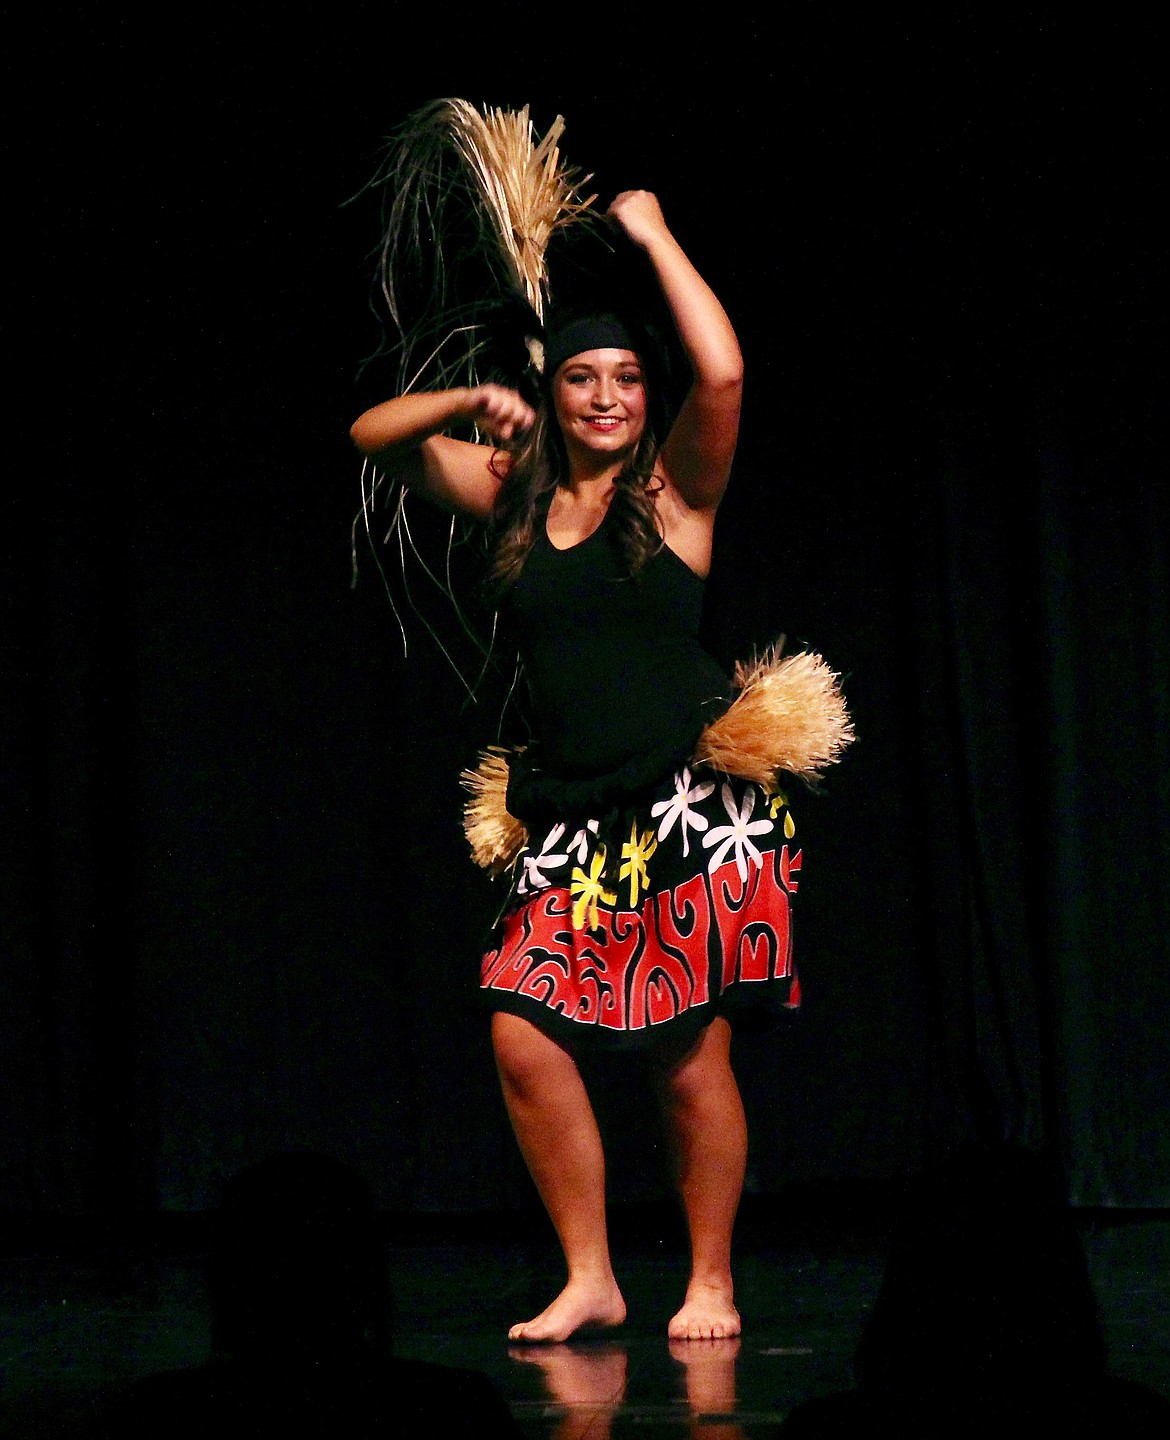 Maile Murdock shows off her dance skills with a Tahitian dance during the talent portion of the DYW 2022 scholarship program.